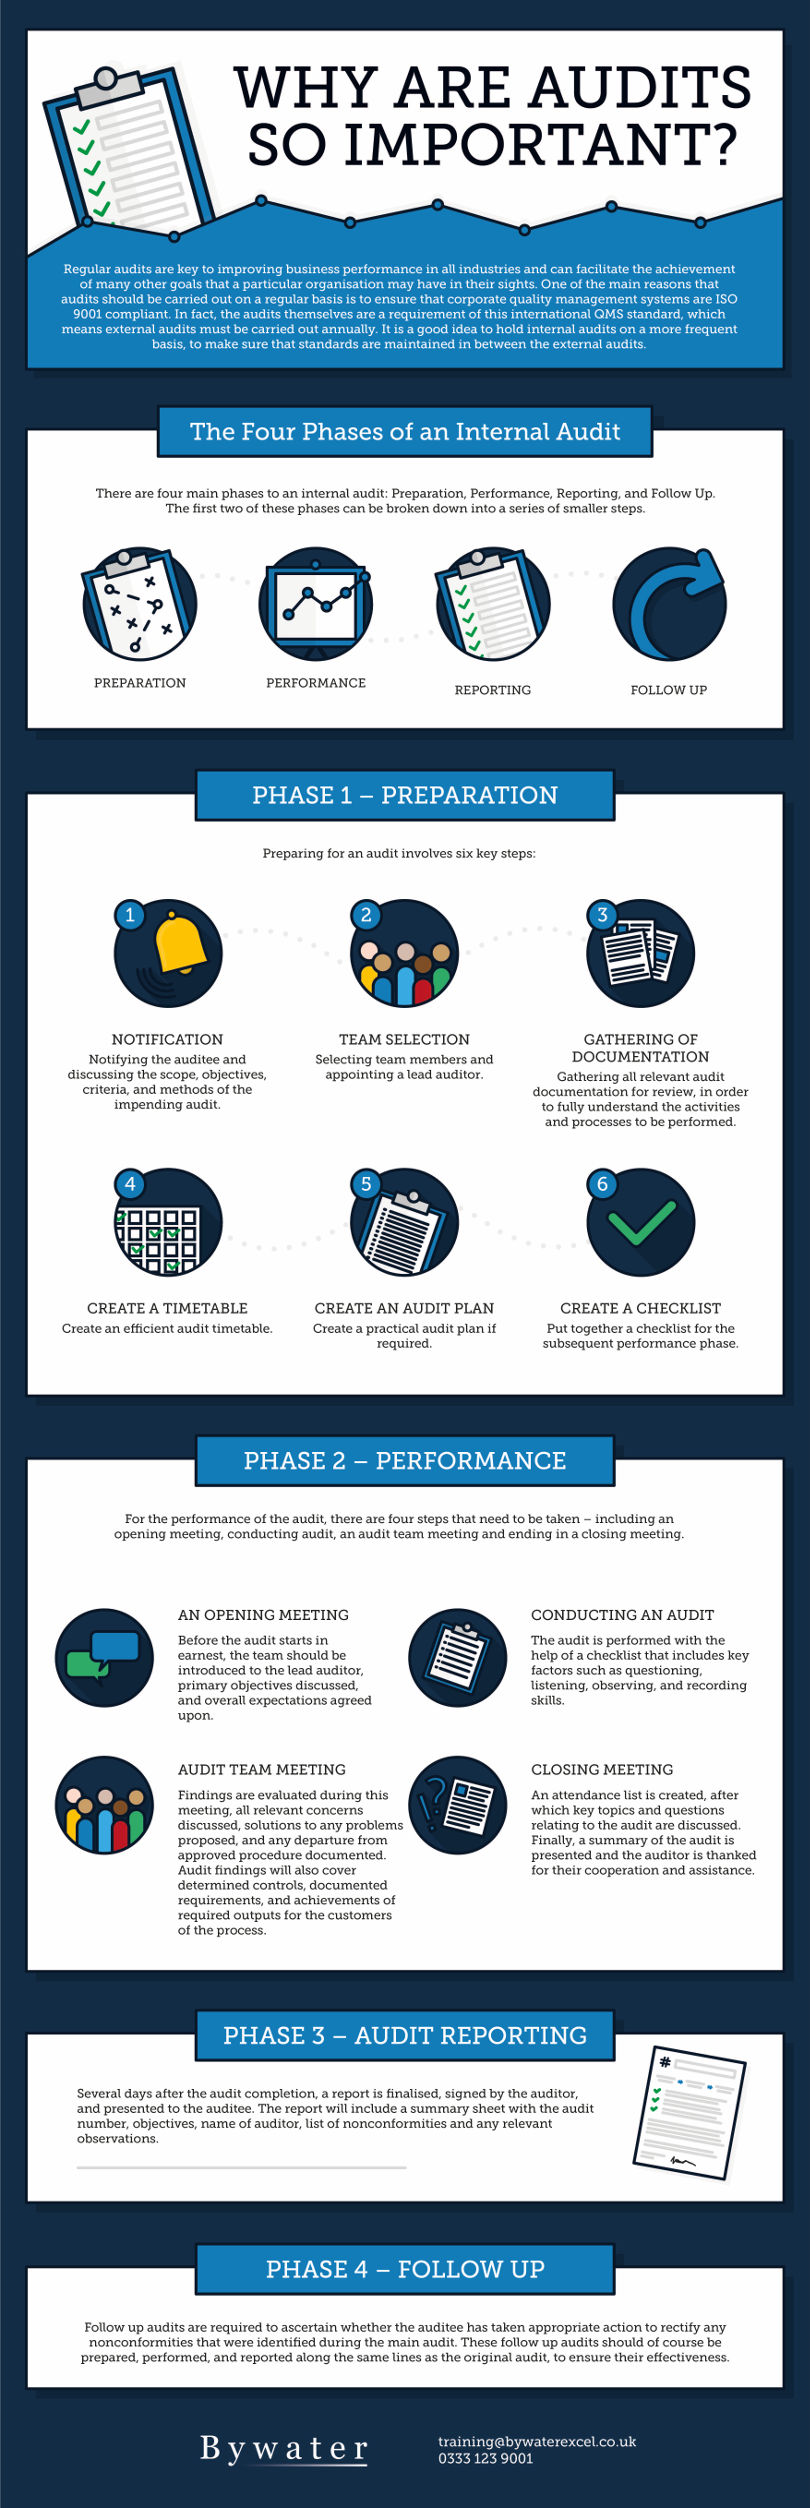 The importance of auditing - Bywater infographic